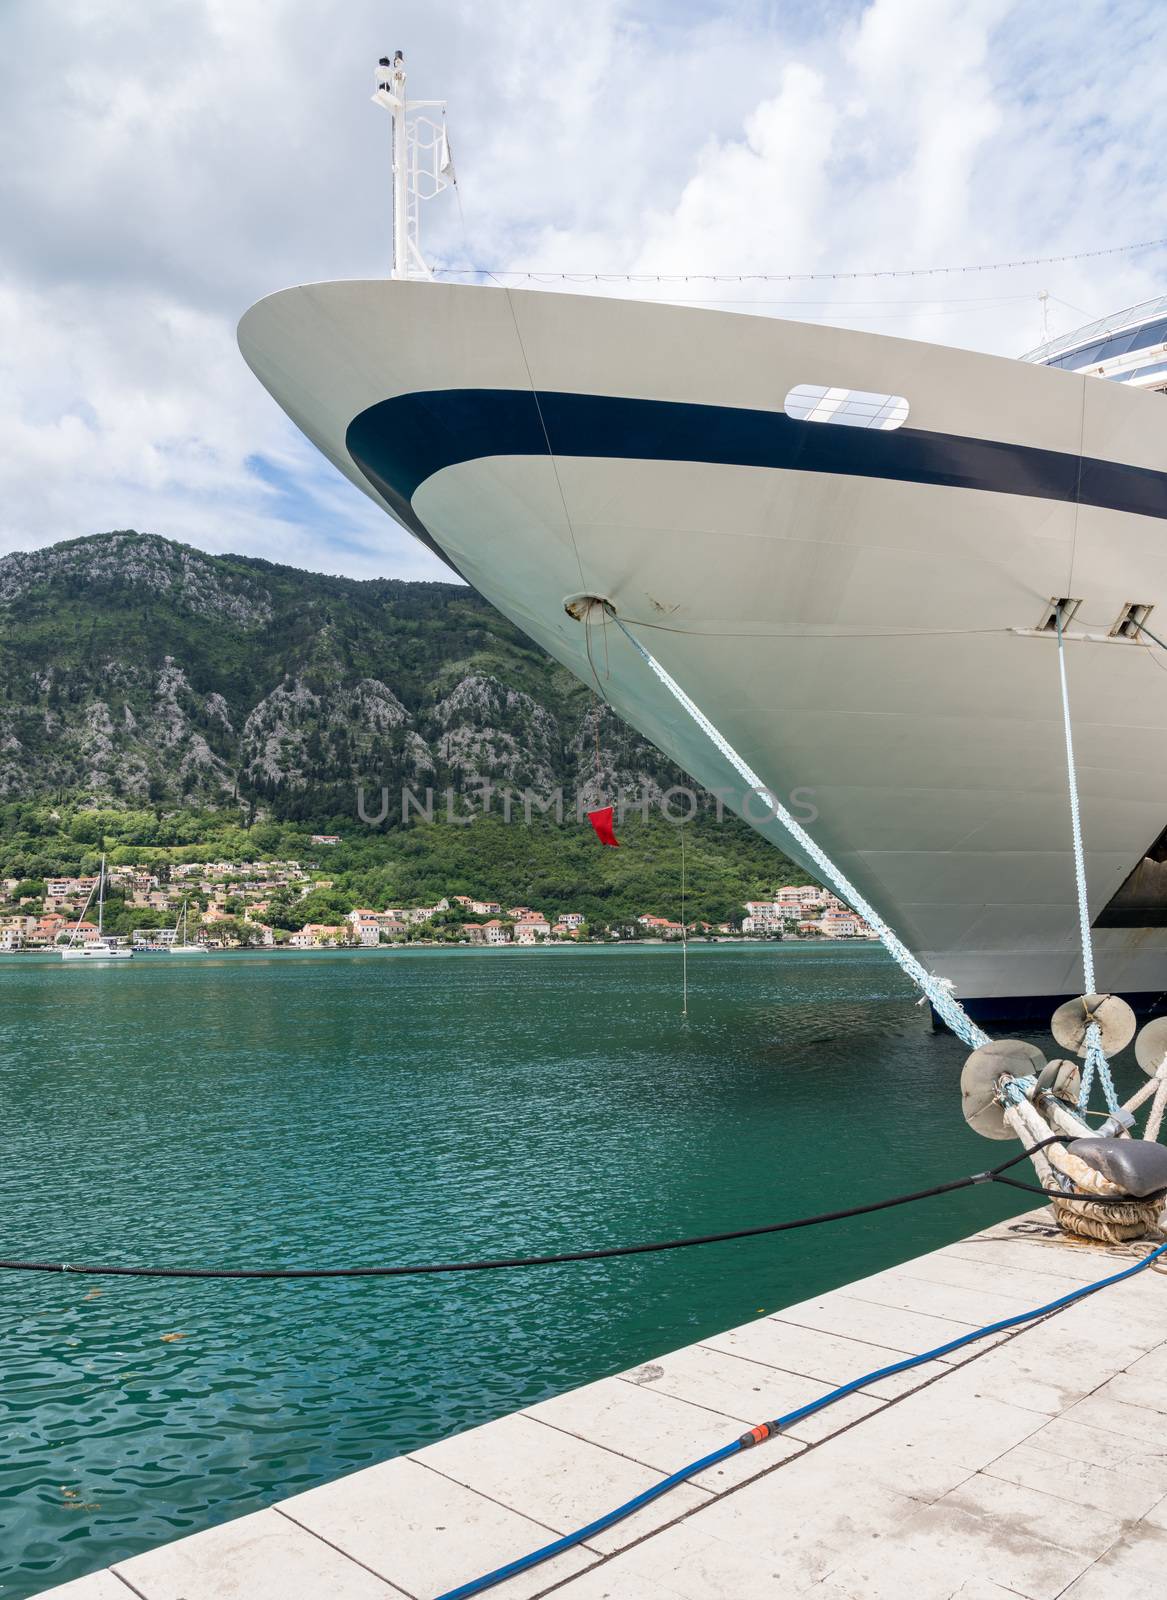 Viking Star bow in port of Kotor Montenegro by steheap